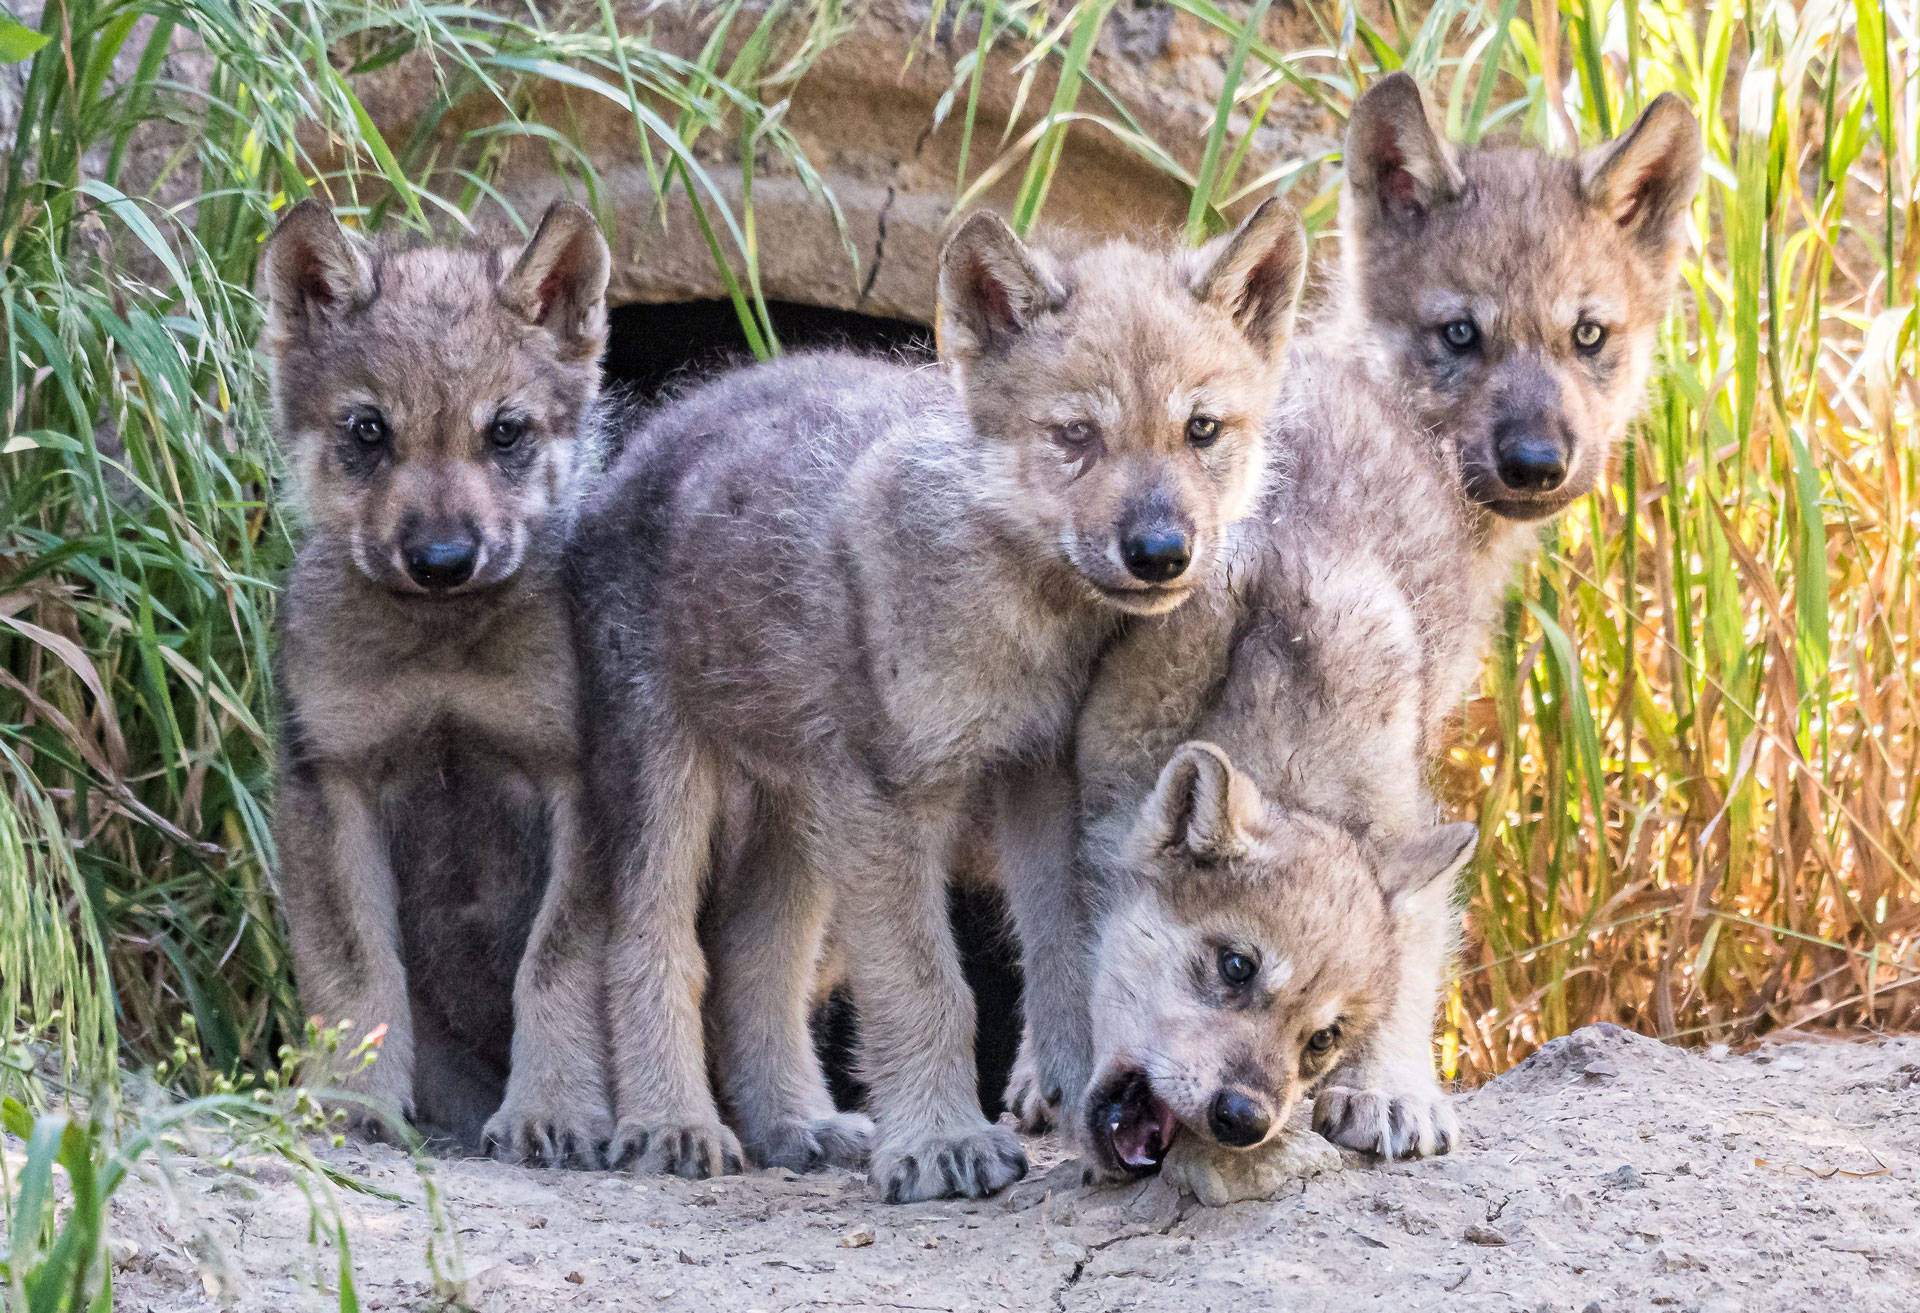 Wolf Pups Emerge From Den at Oakland Zoo to Begin Goodwill Mission | KQED